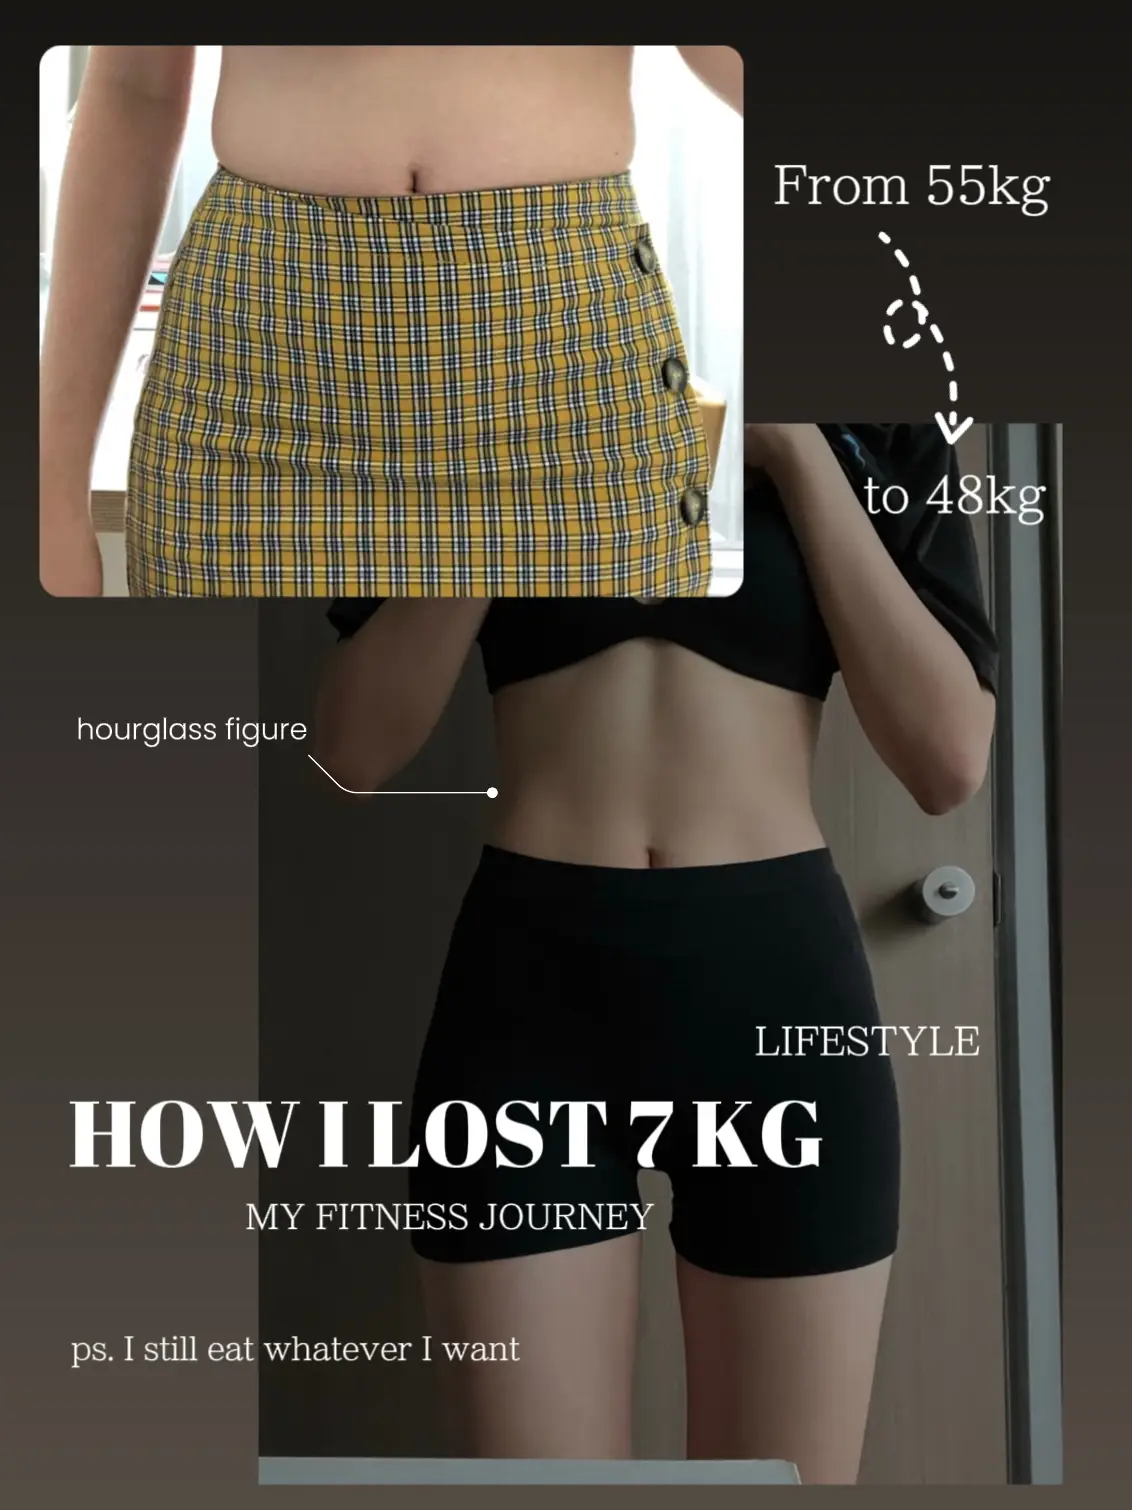 how I lost weight 's images(0)